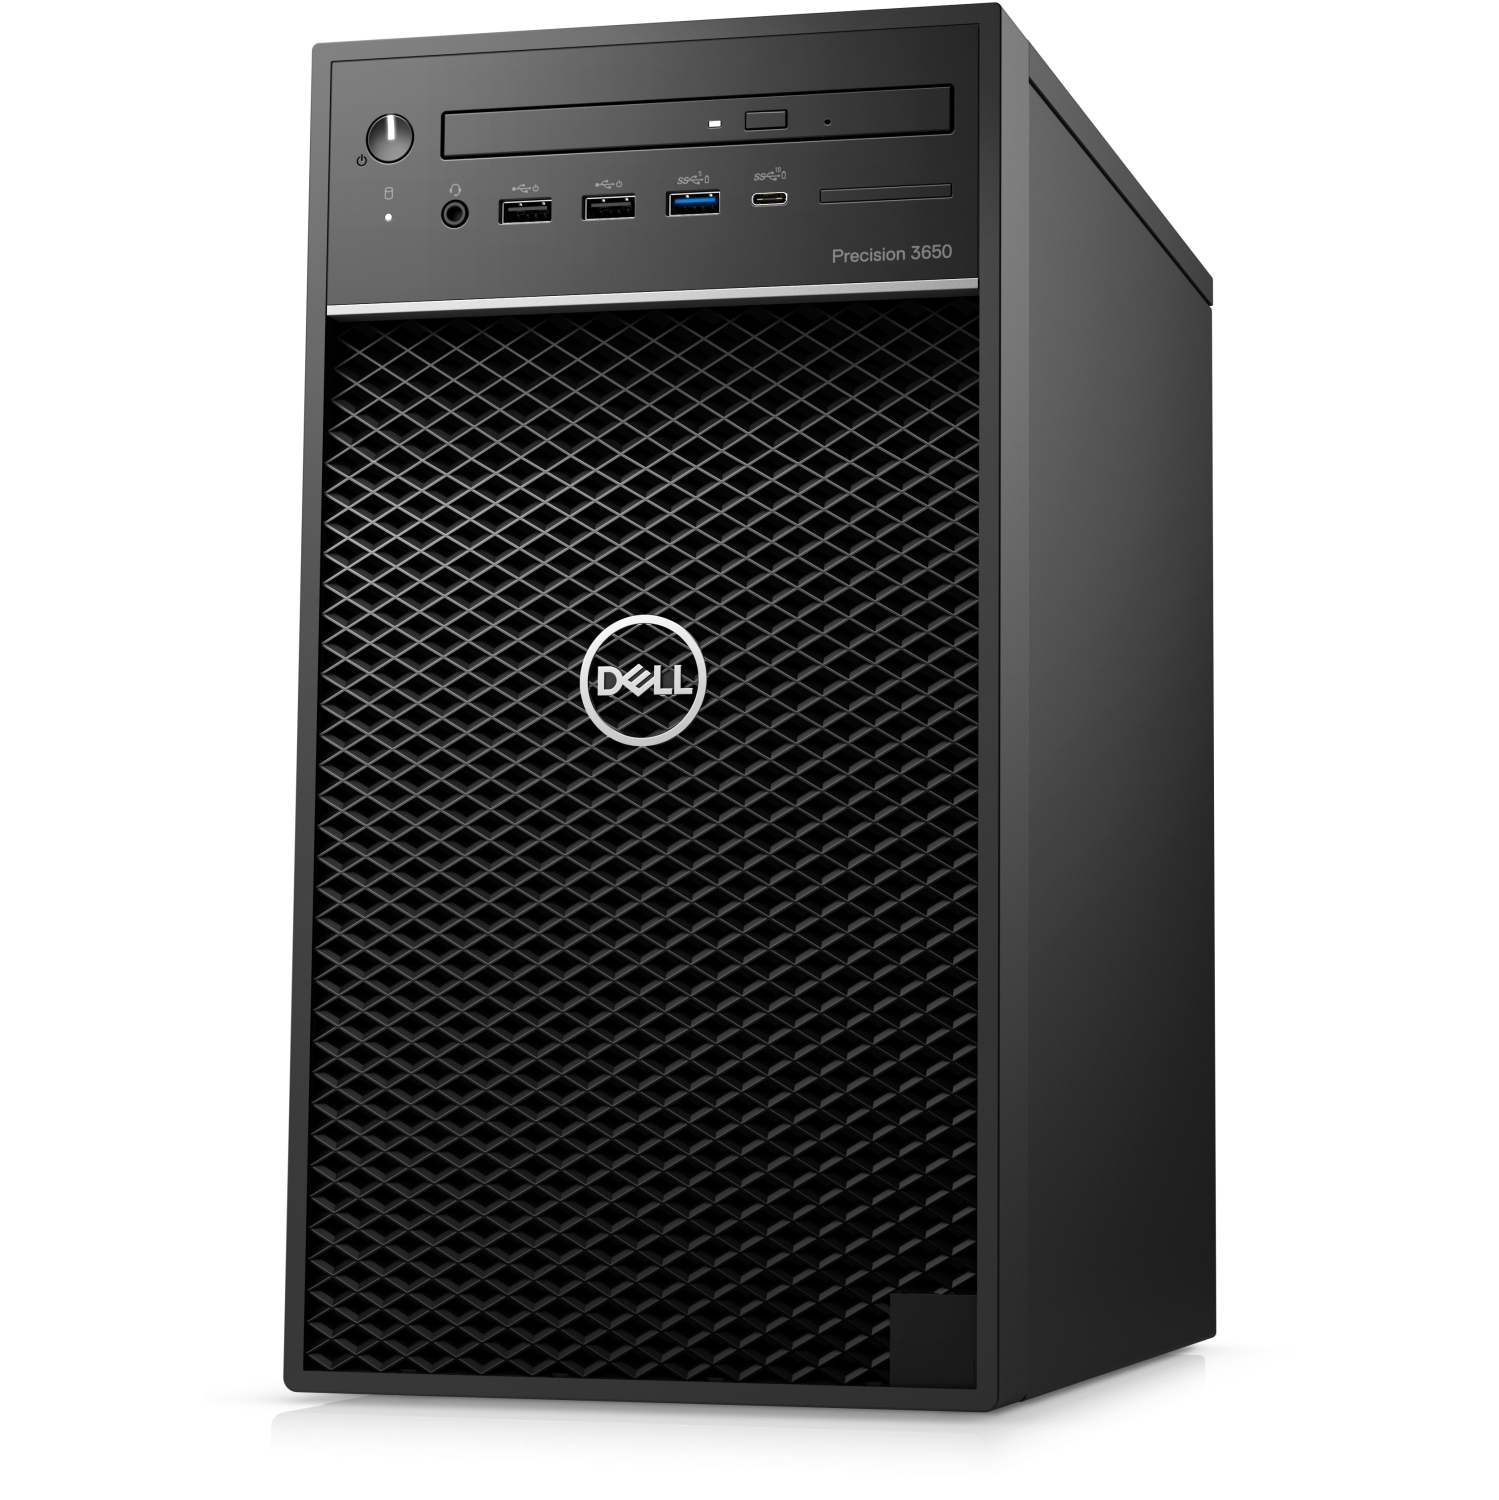 Refurbished (Excellent) - Dell Precision T3650 Workstation Desktop (2021) | Core i7 - 1TB SSD - 64GB RAM - RTX 3070 | 8 Cores @ 5 GHz - 11th Gen CPU Certified Refurbished